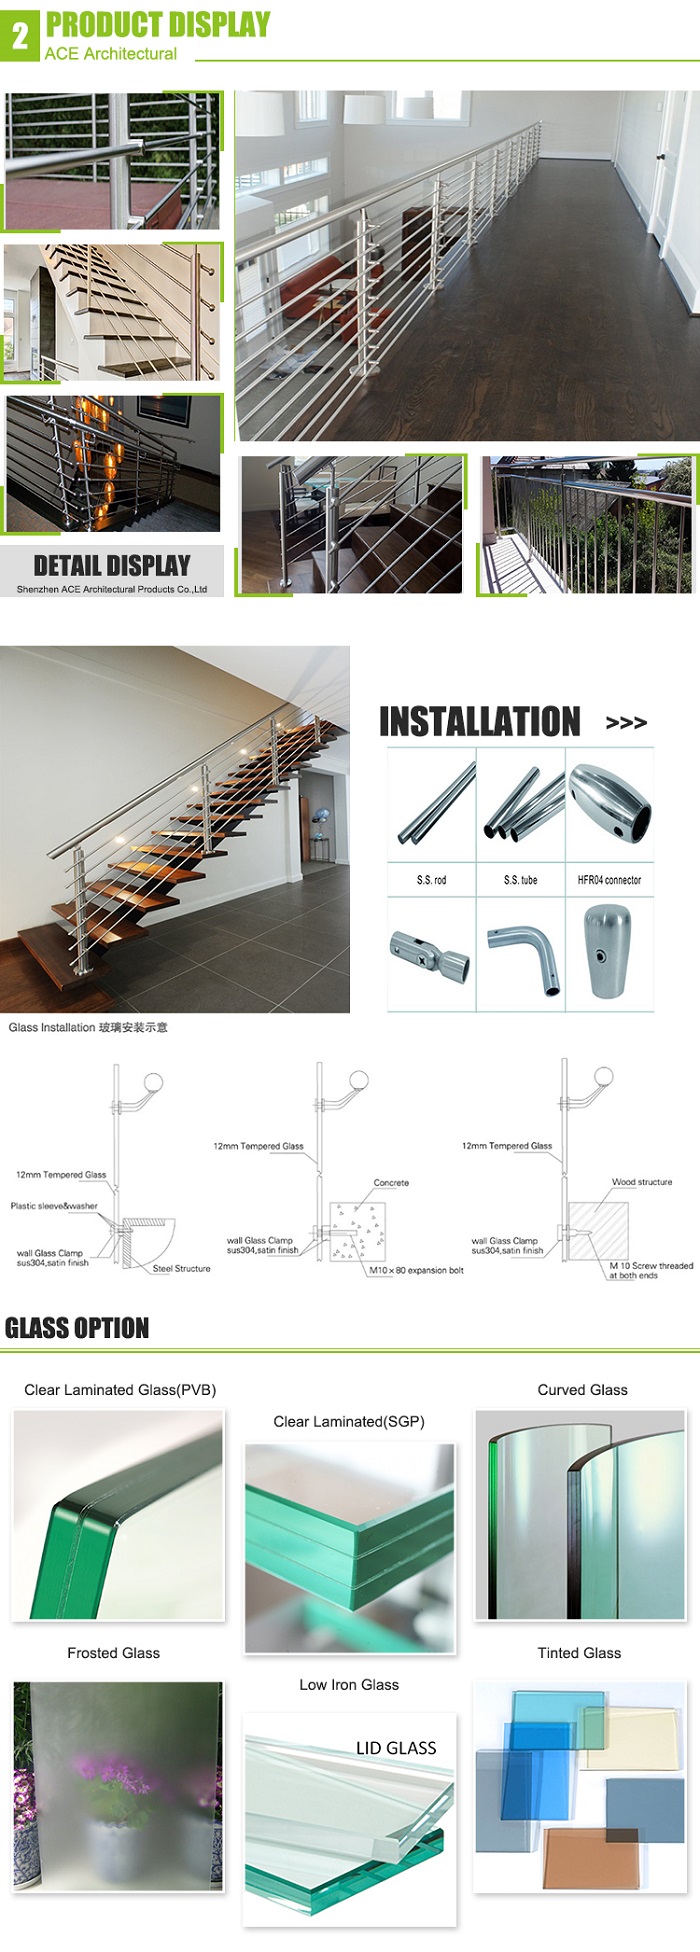 SS316 Material Exterior hand railing systems with solid rod design